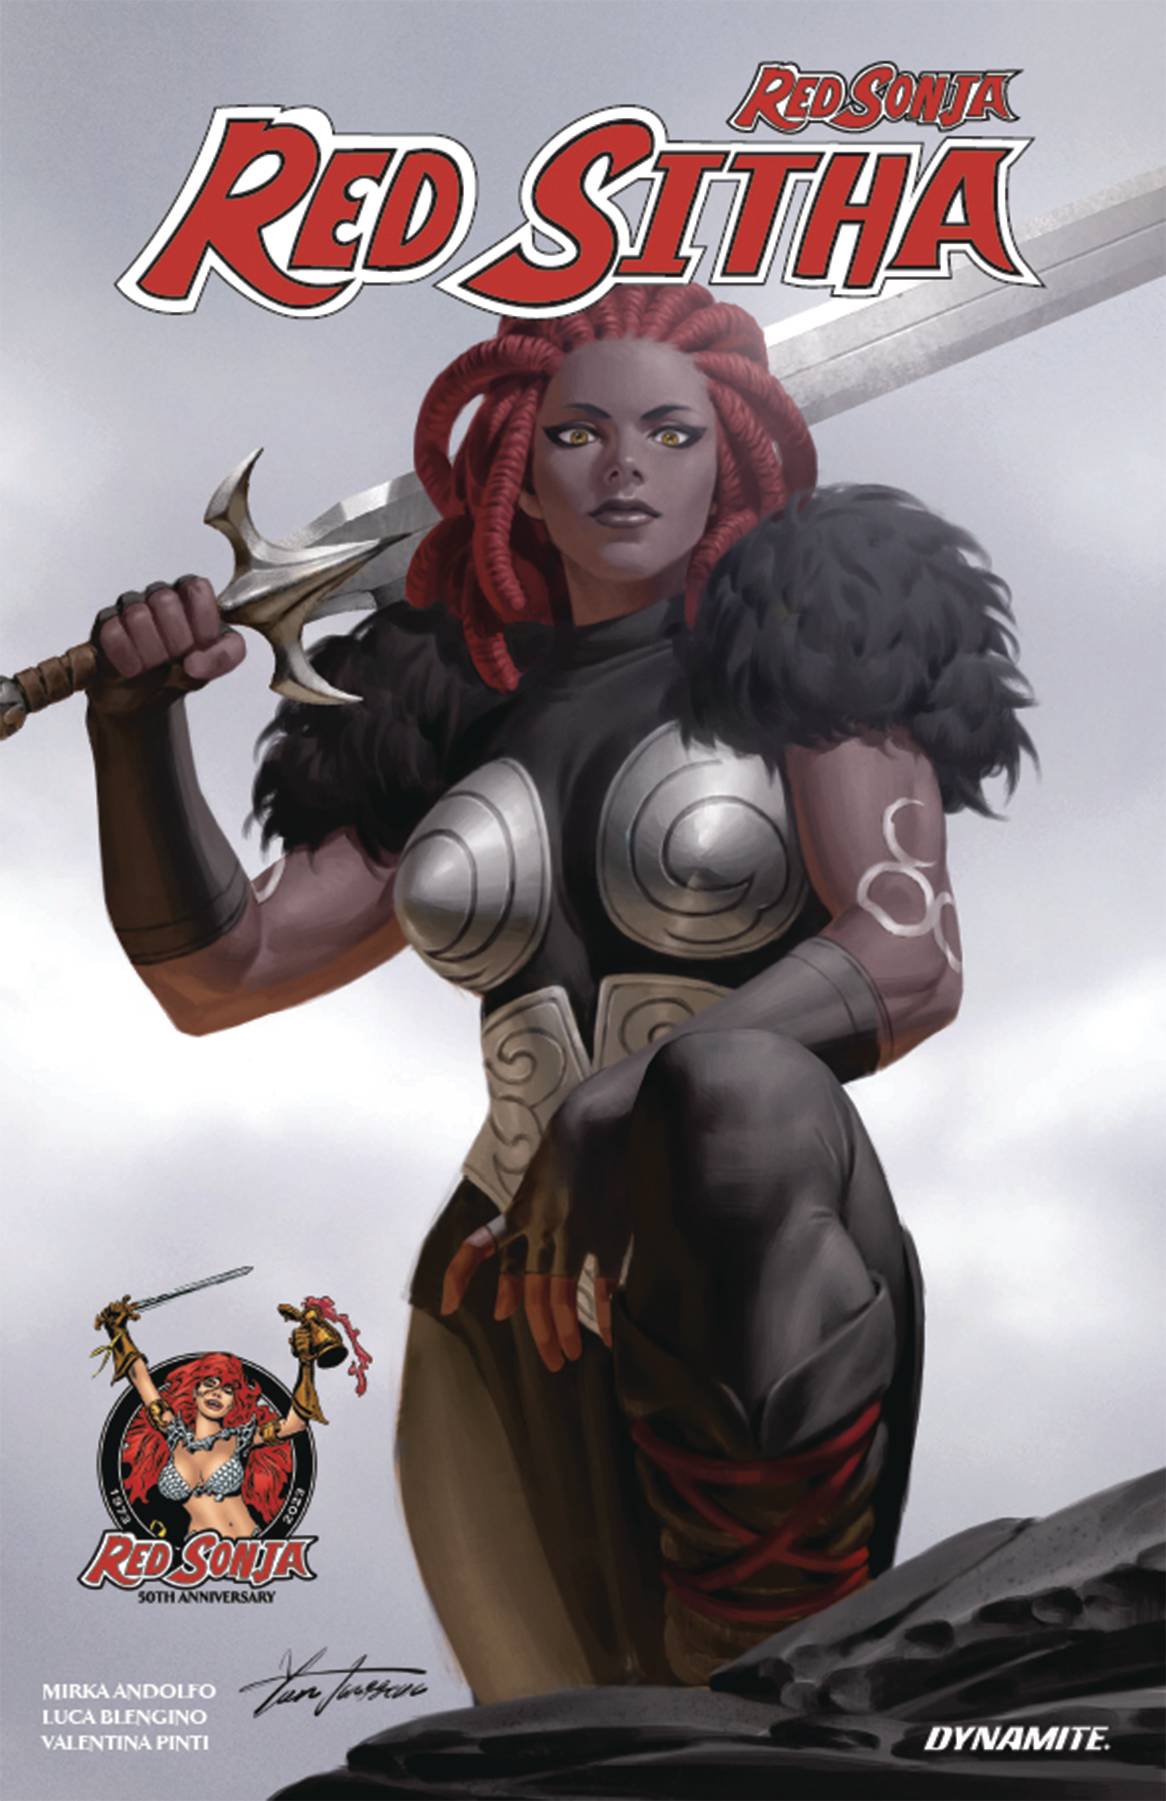 RED SONJA RED SITHA TP